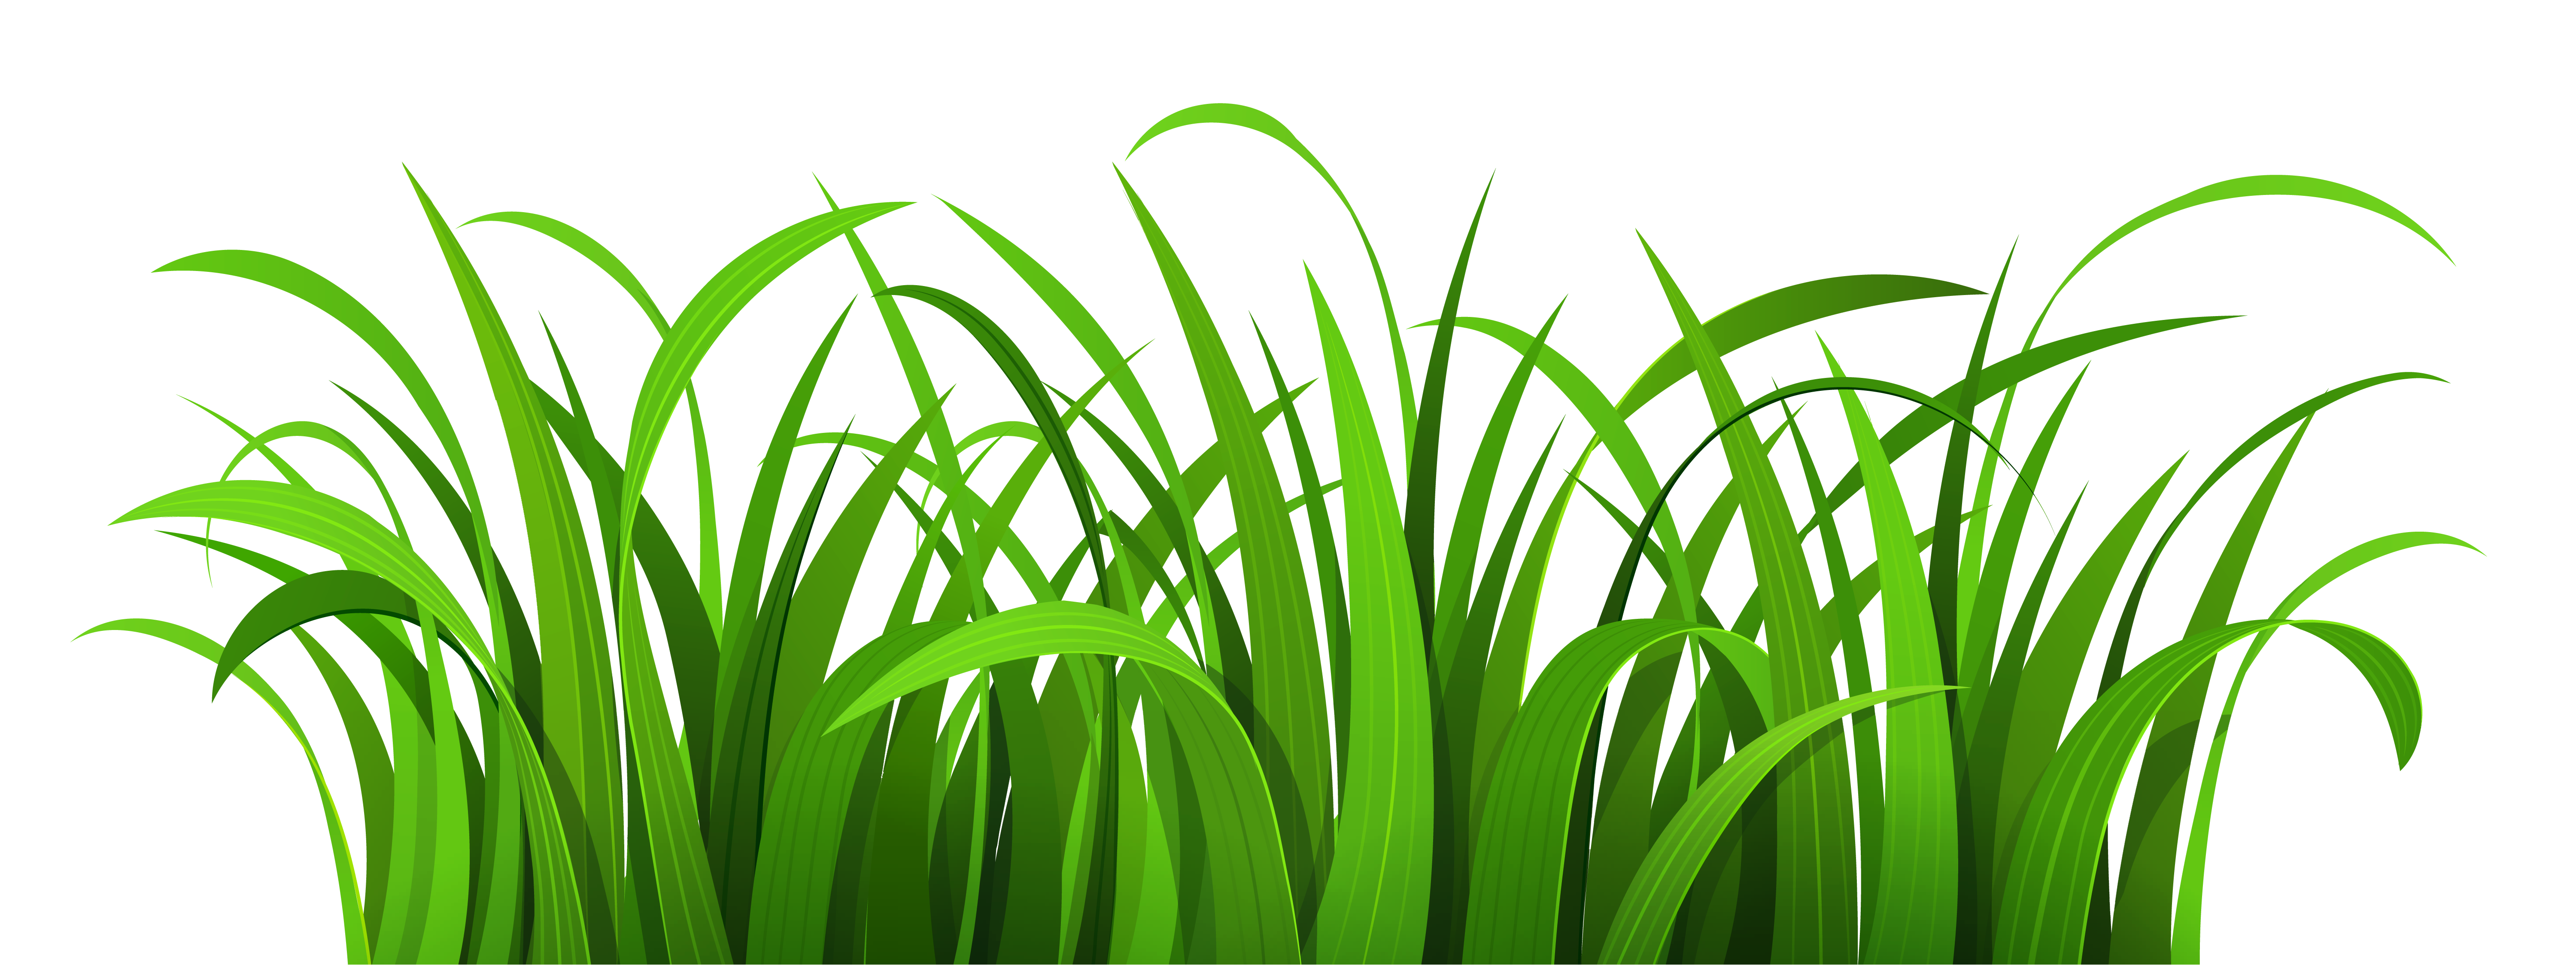 Grass Clipart Black And White | Clipart Panda - Free Clipart Images